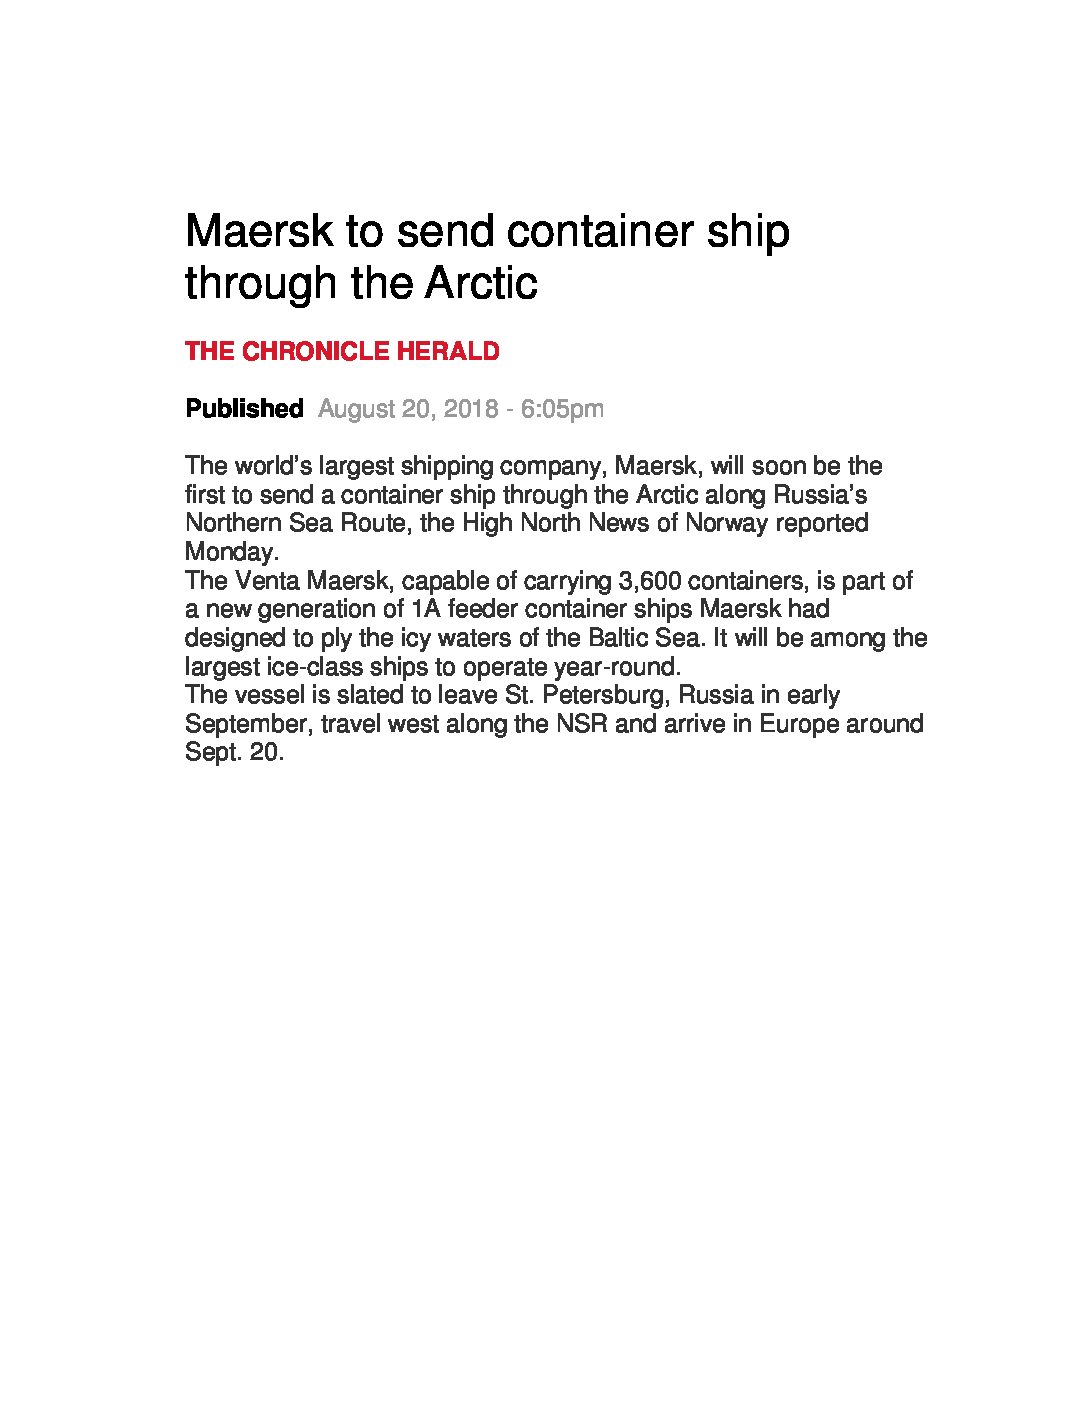 Maersk to send container ship through the Arctic.pdf